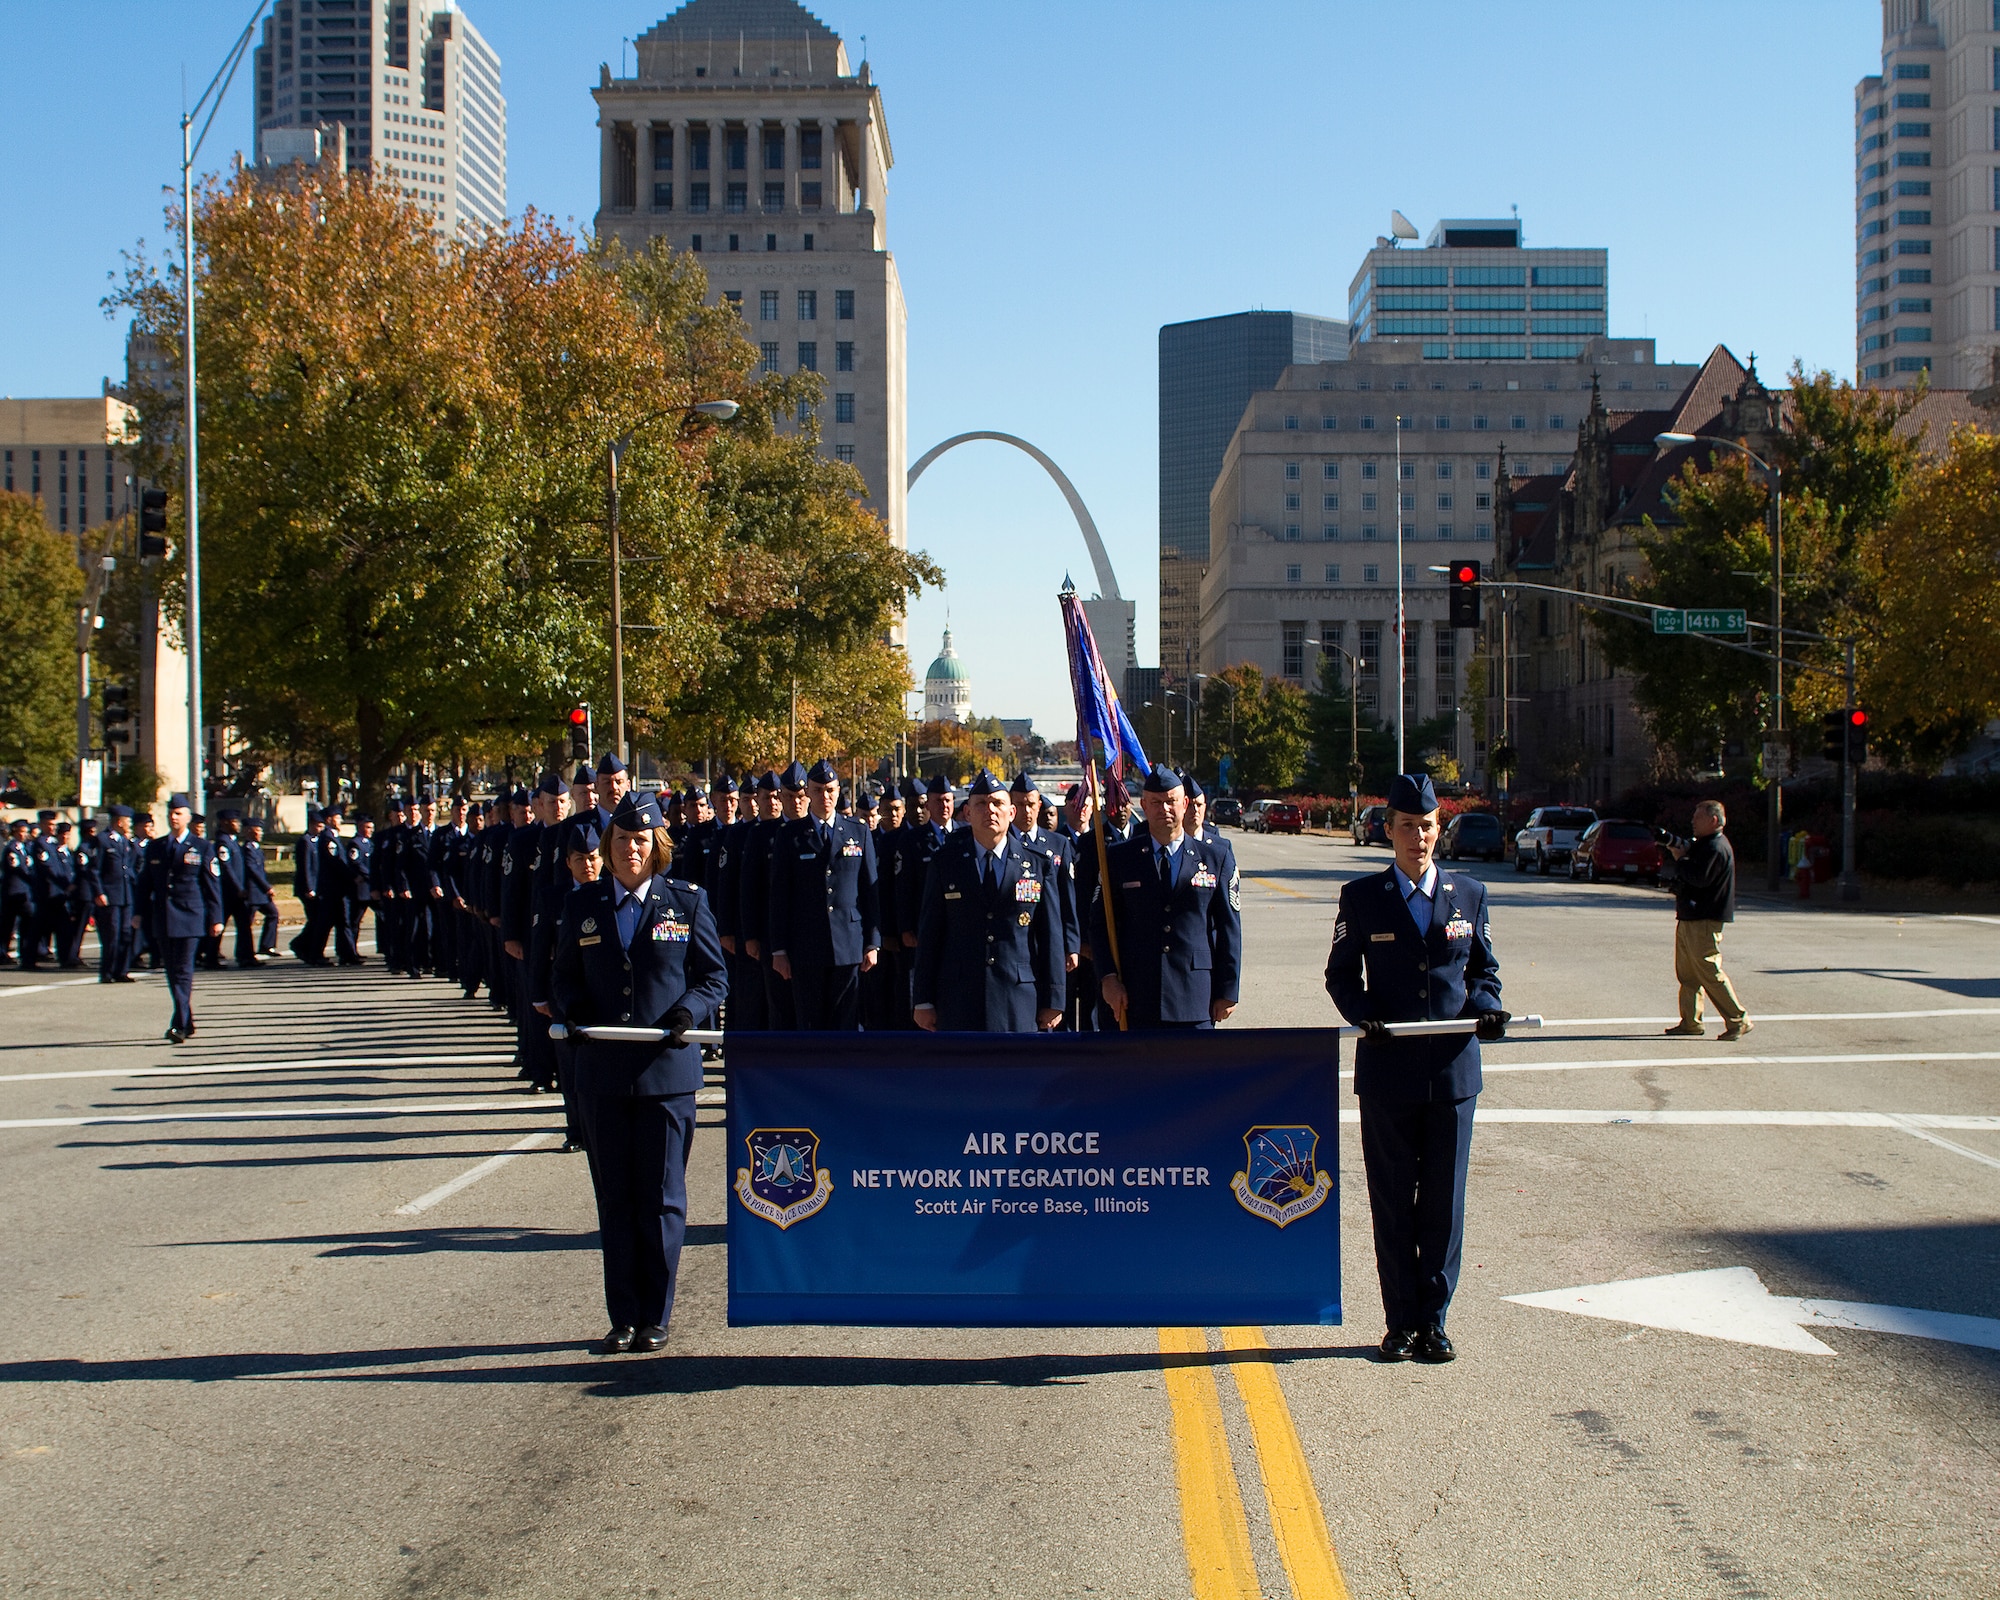 Airmen from the Air Force Network Integration Center at Scott Air Force Base, Ill., march in formation down Market Street in downtown St. Louis as part of the city's 27th annual Veterans Day parade Nov. 6.  (U.S. Air Force photo/MSgt G. Shawn Lowry)
